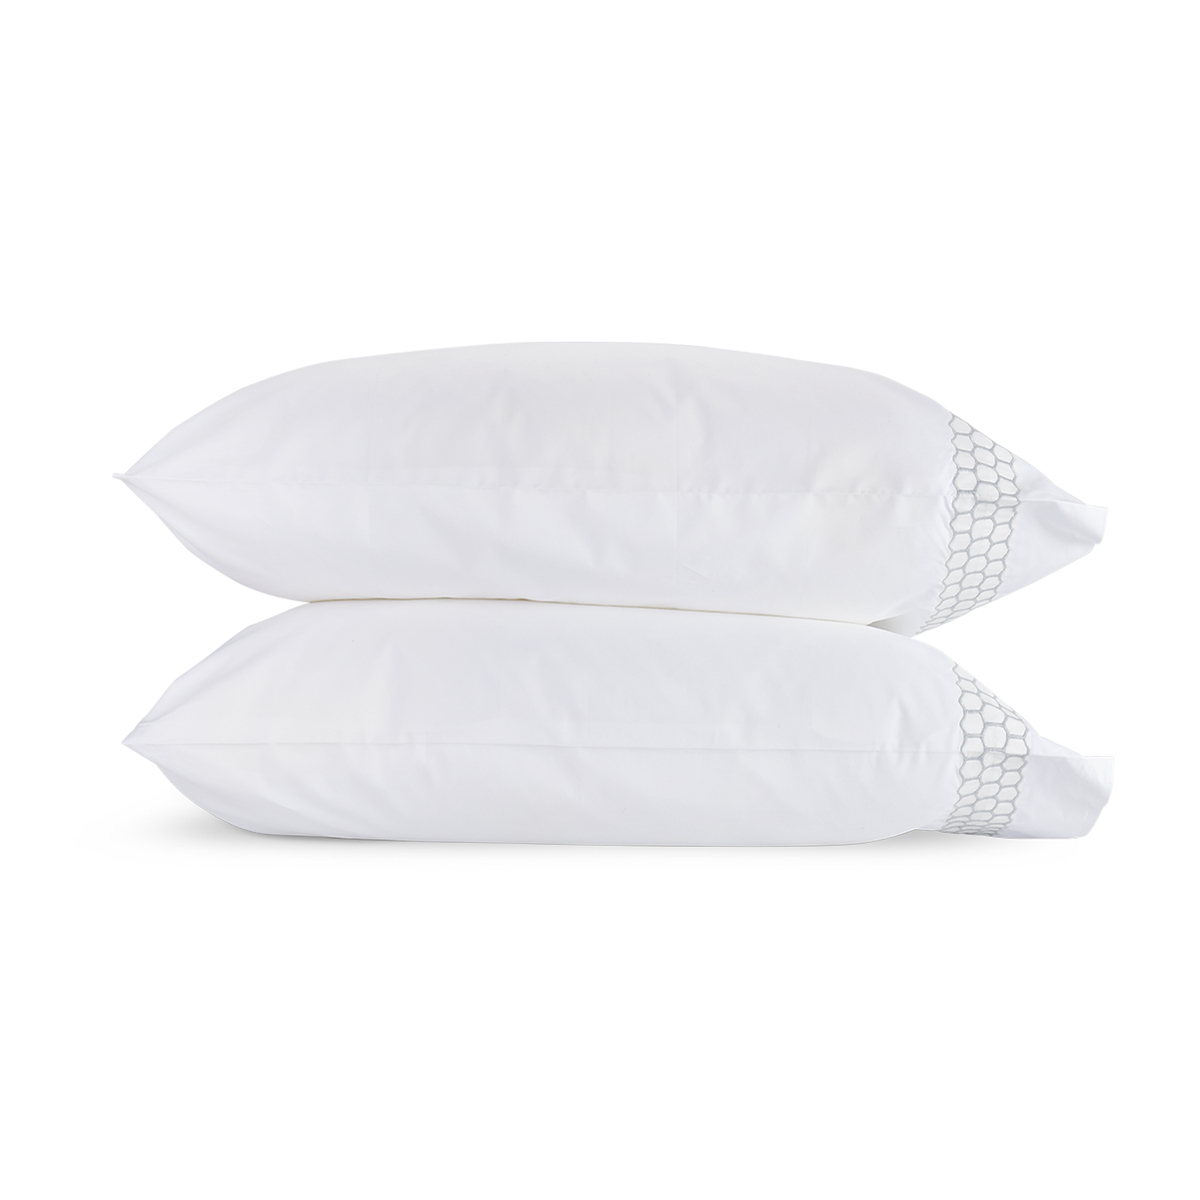 Clear Image of Matouk Liana Bedding Pillowcases in Silver Color